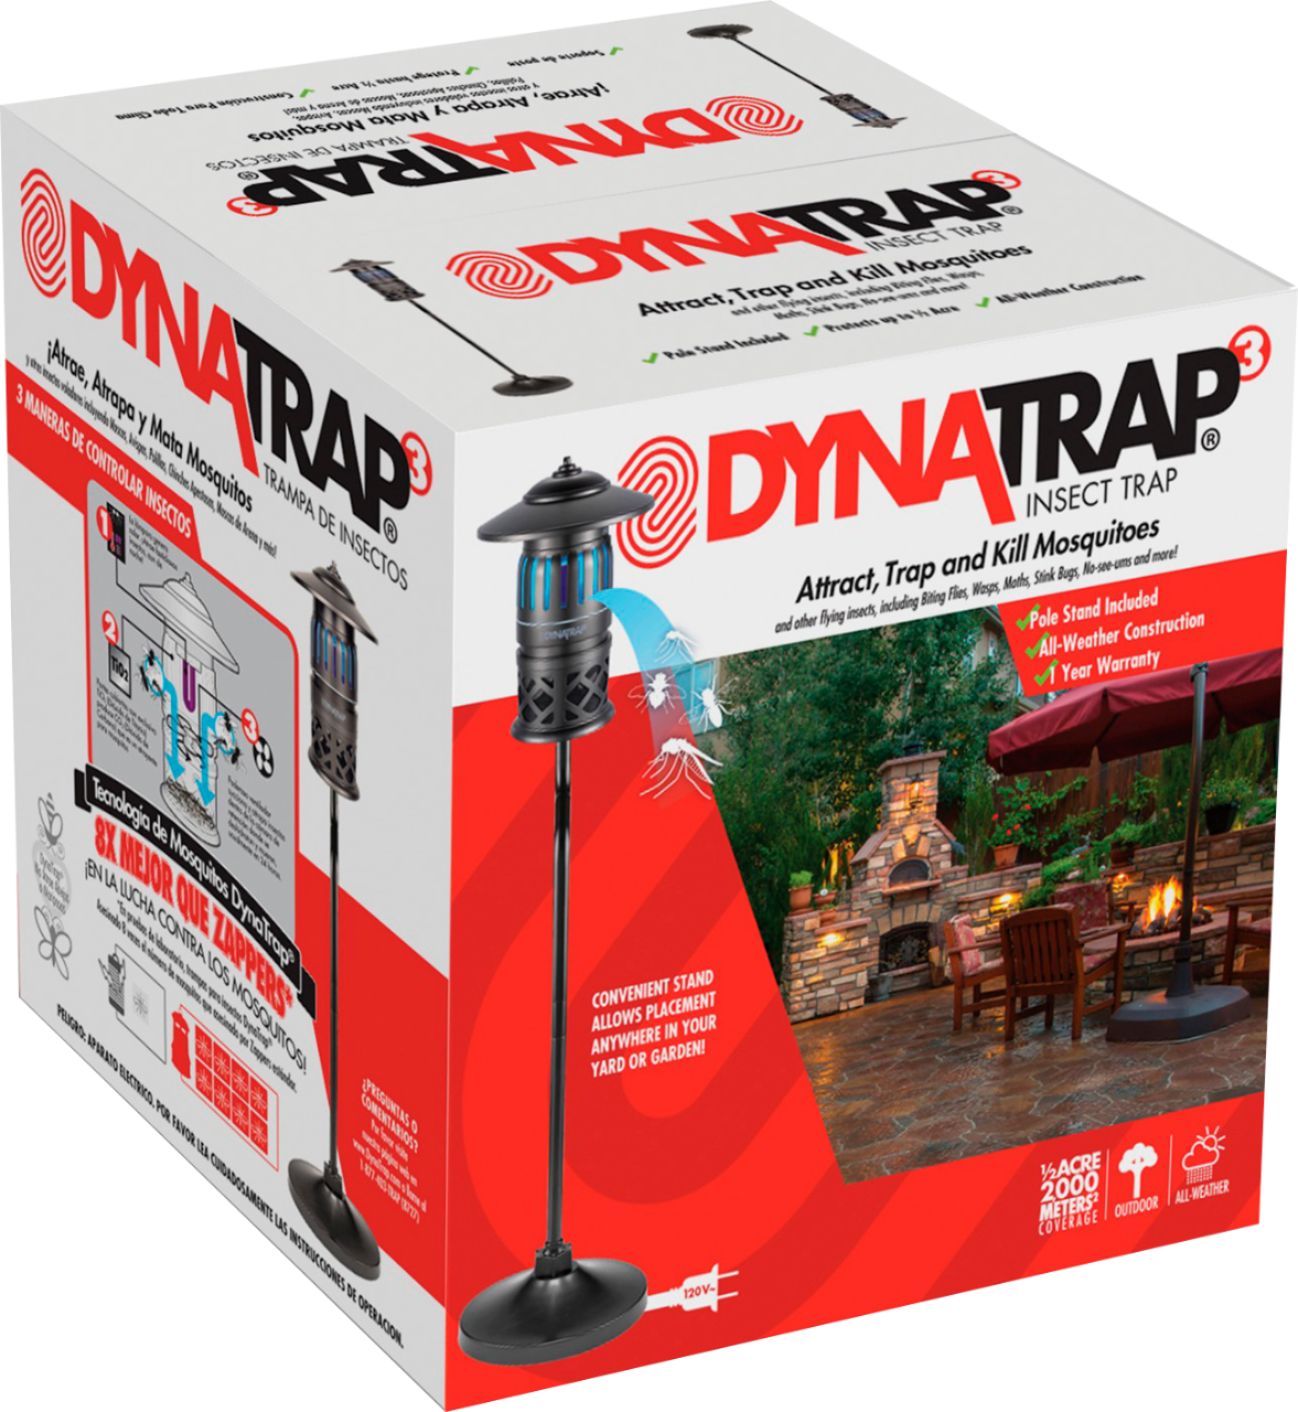 Dynatrap Half Acre Wall Mount Insect Trap - The Warming Store